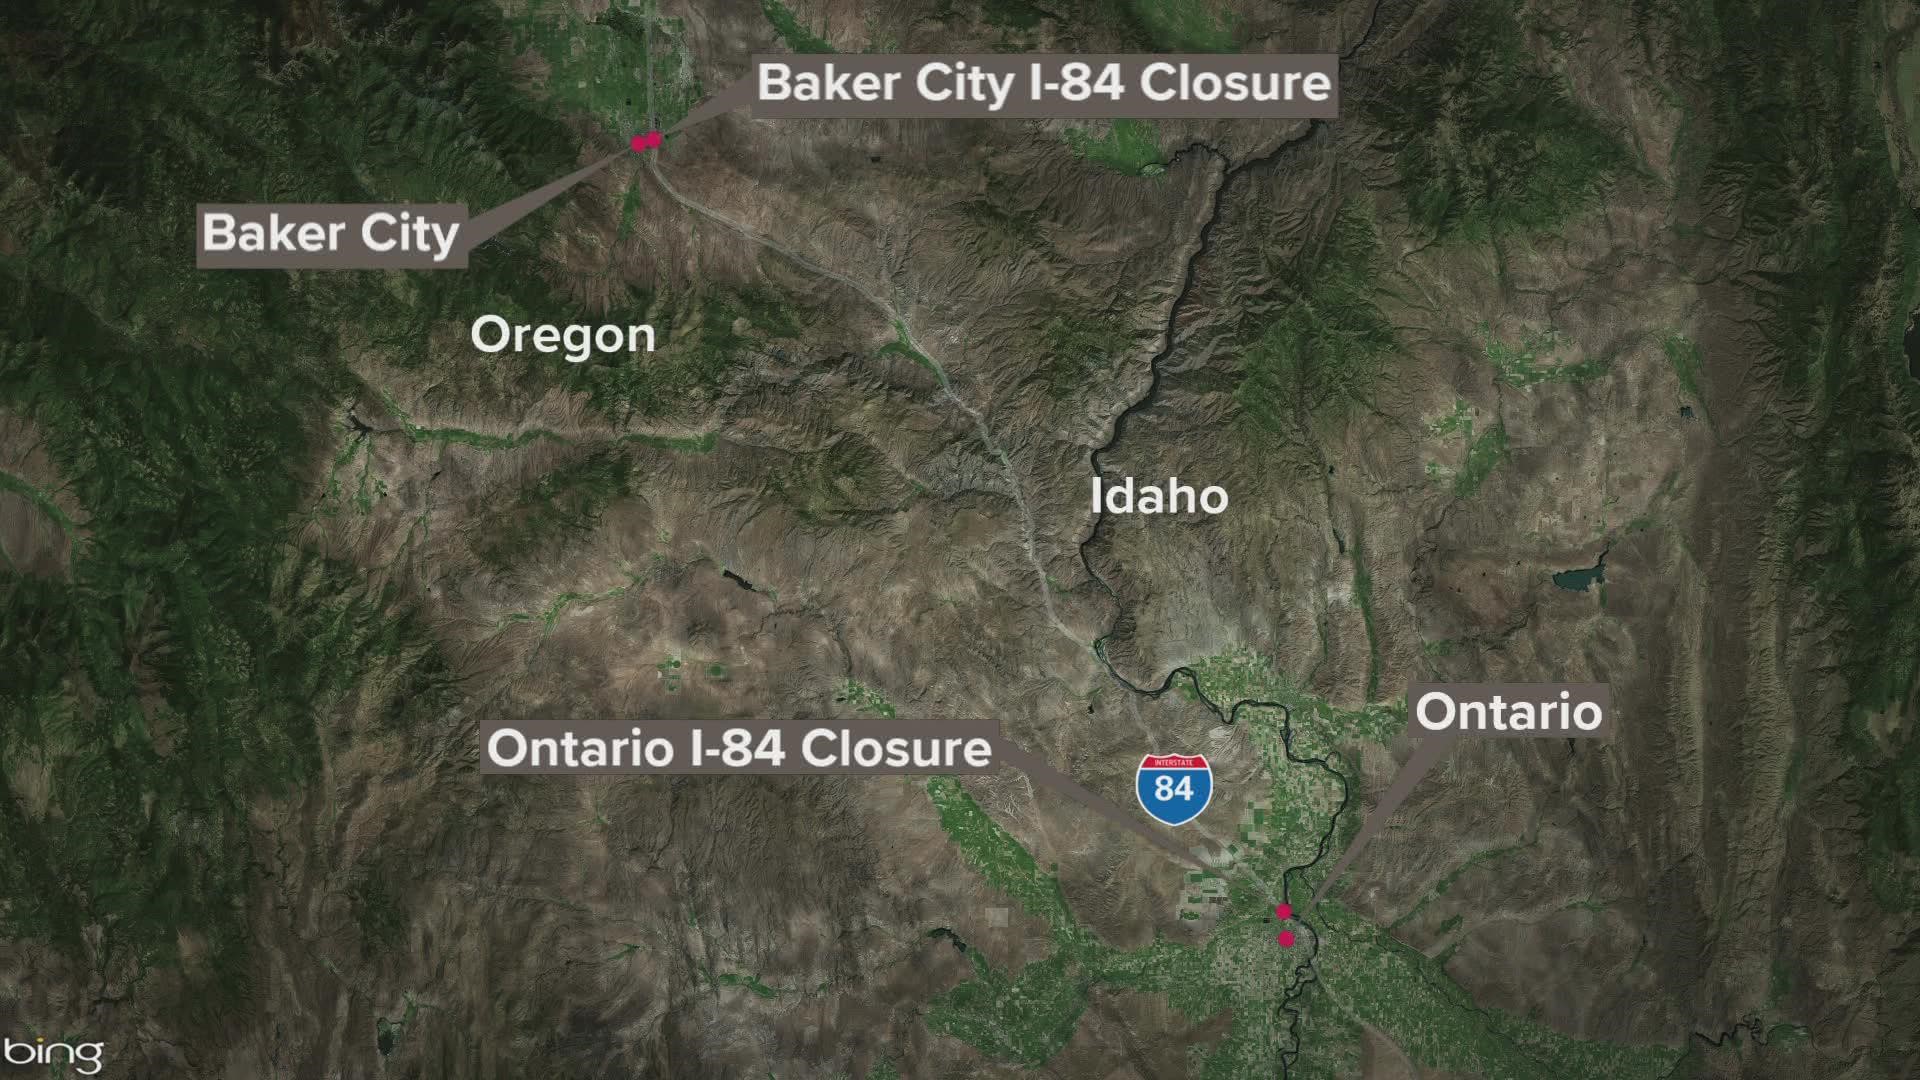 I-84 is closed from Ontario to Baker City as firefighters respond to the Willow Creek Fire that is estimated to be 15 thousand acres.